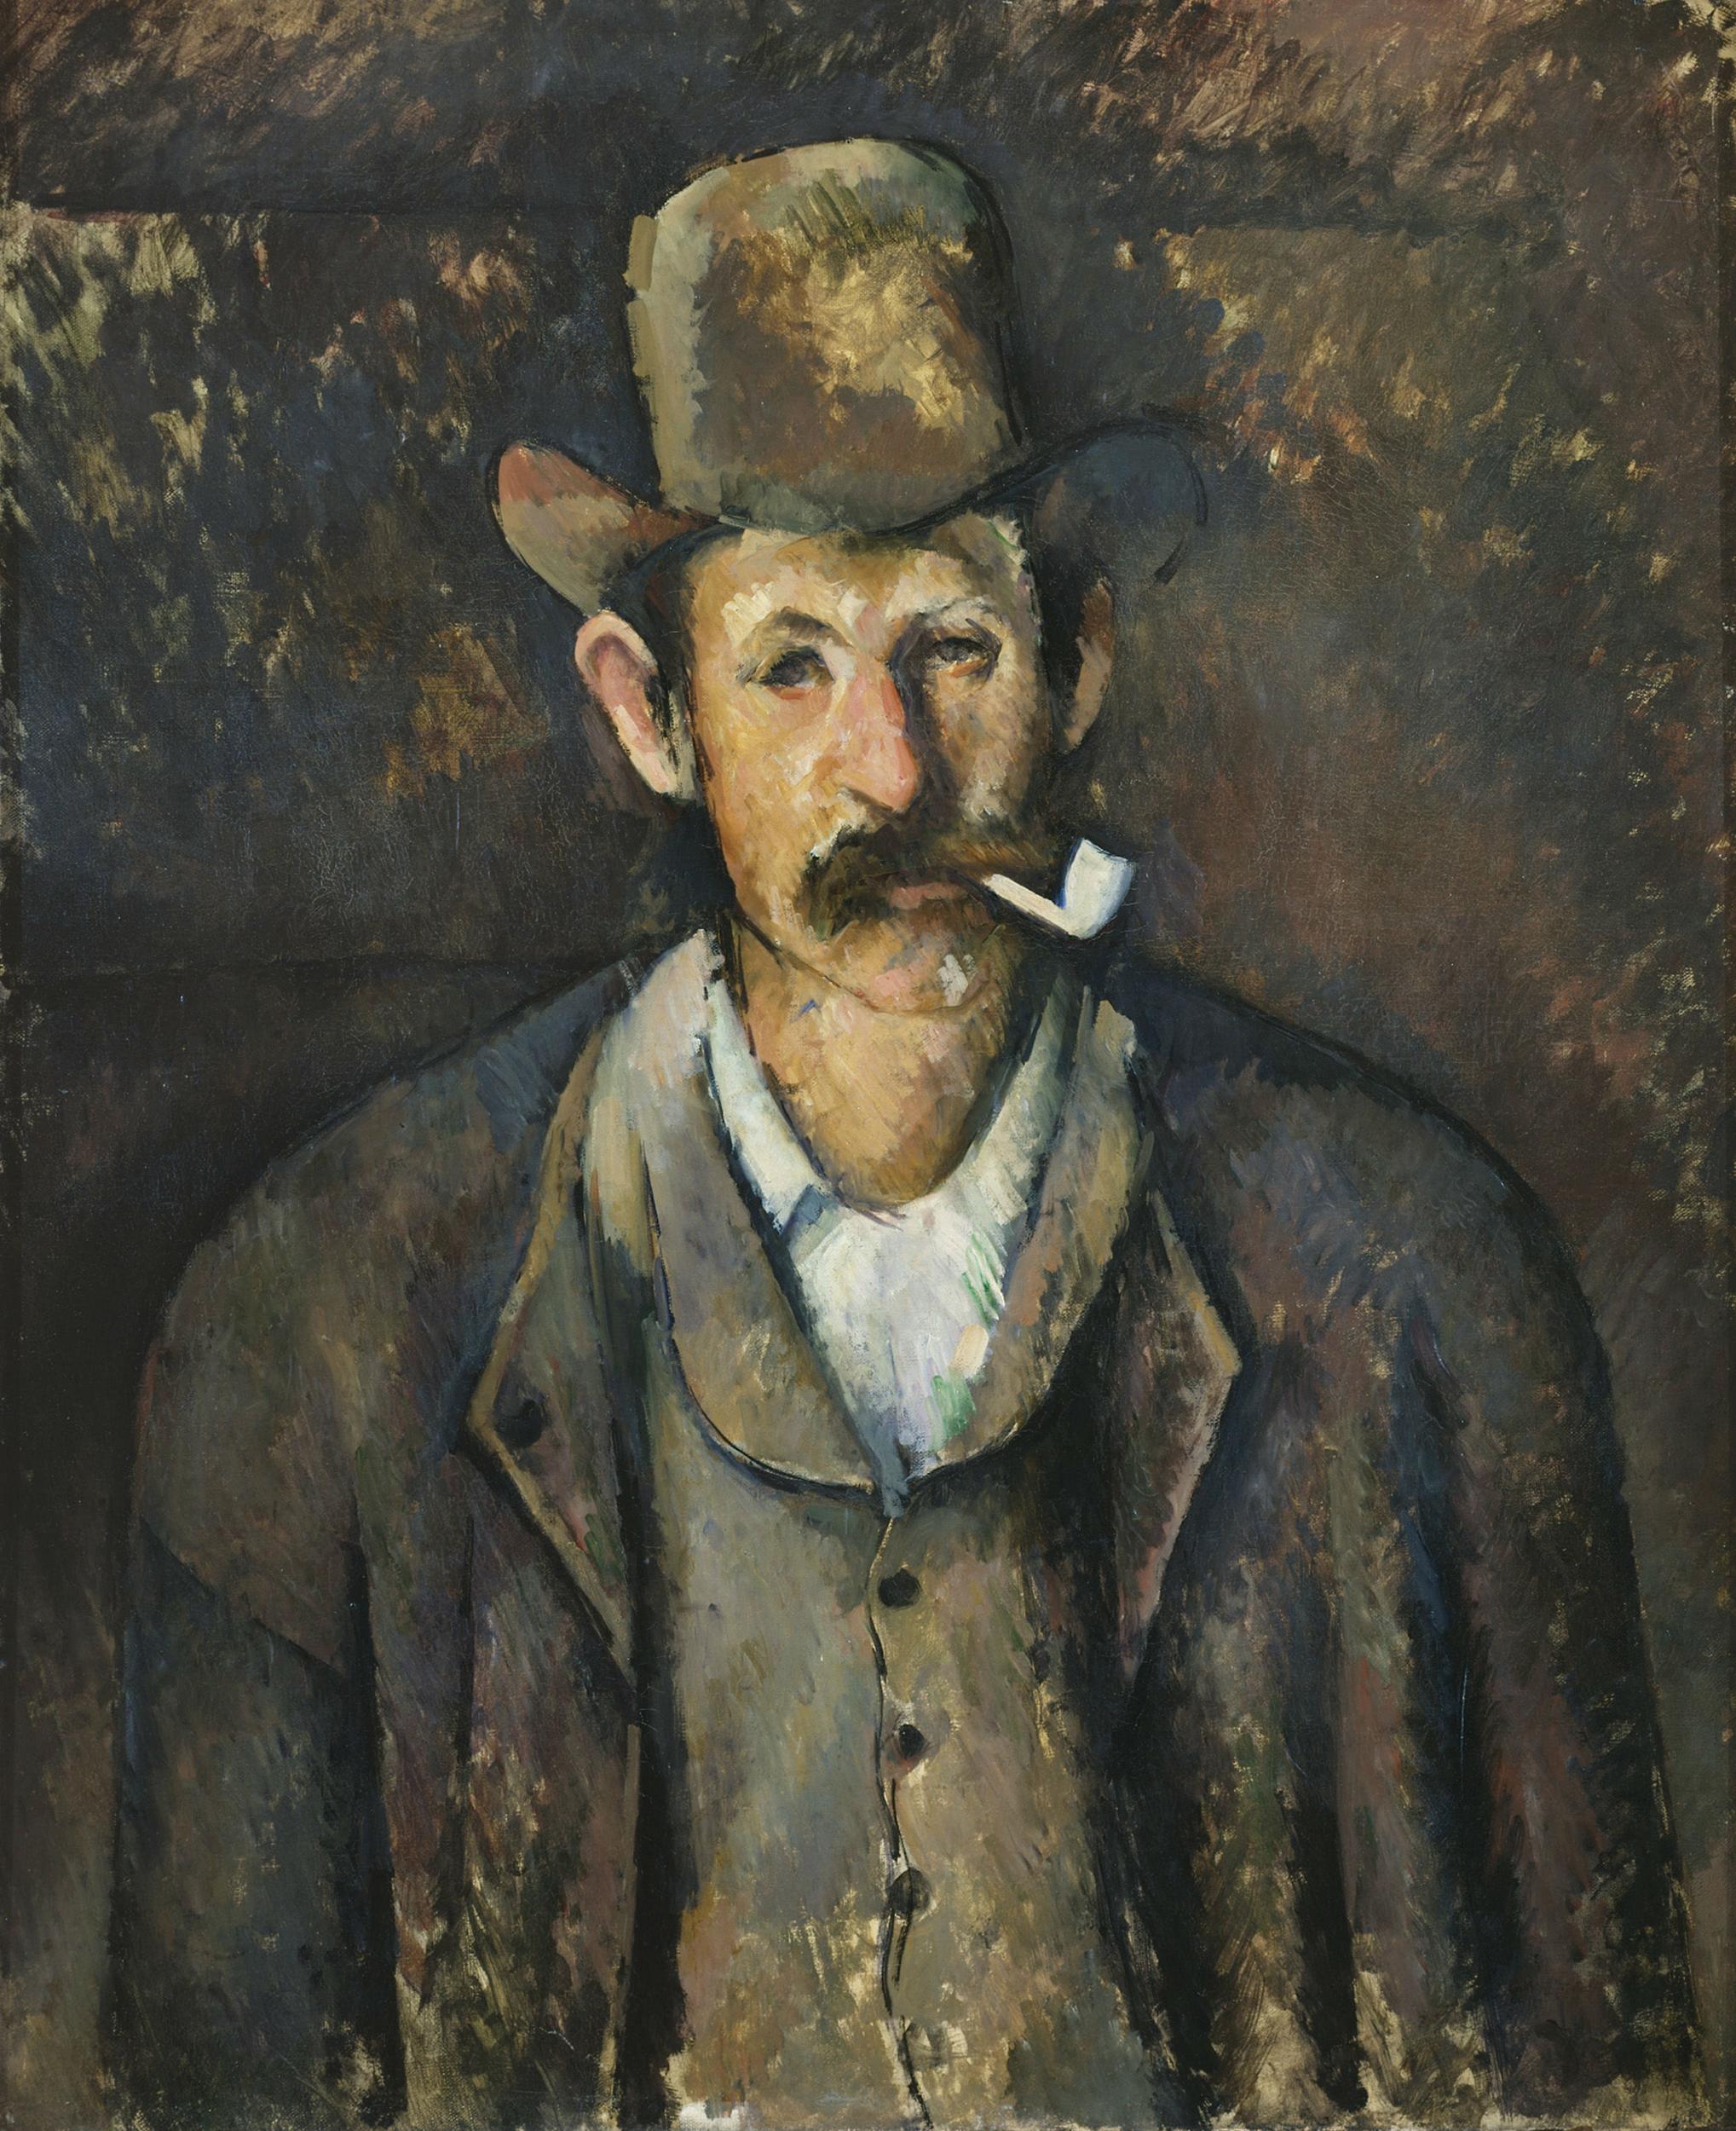 ‘Man with Pipe’, 1891-6